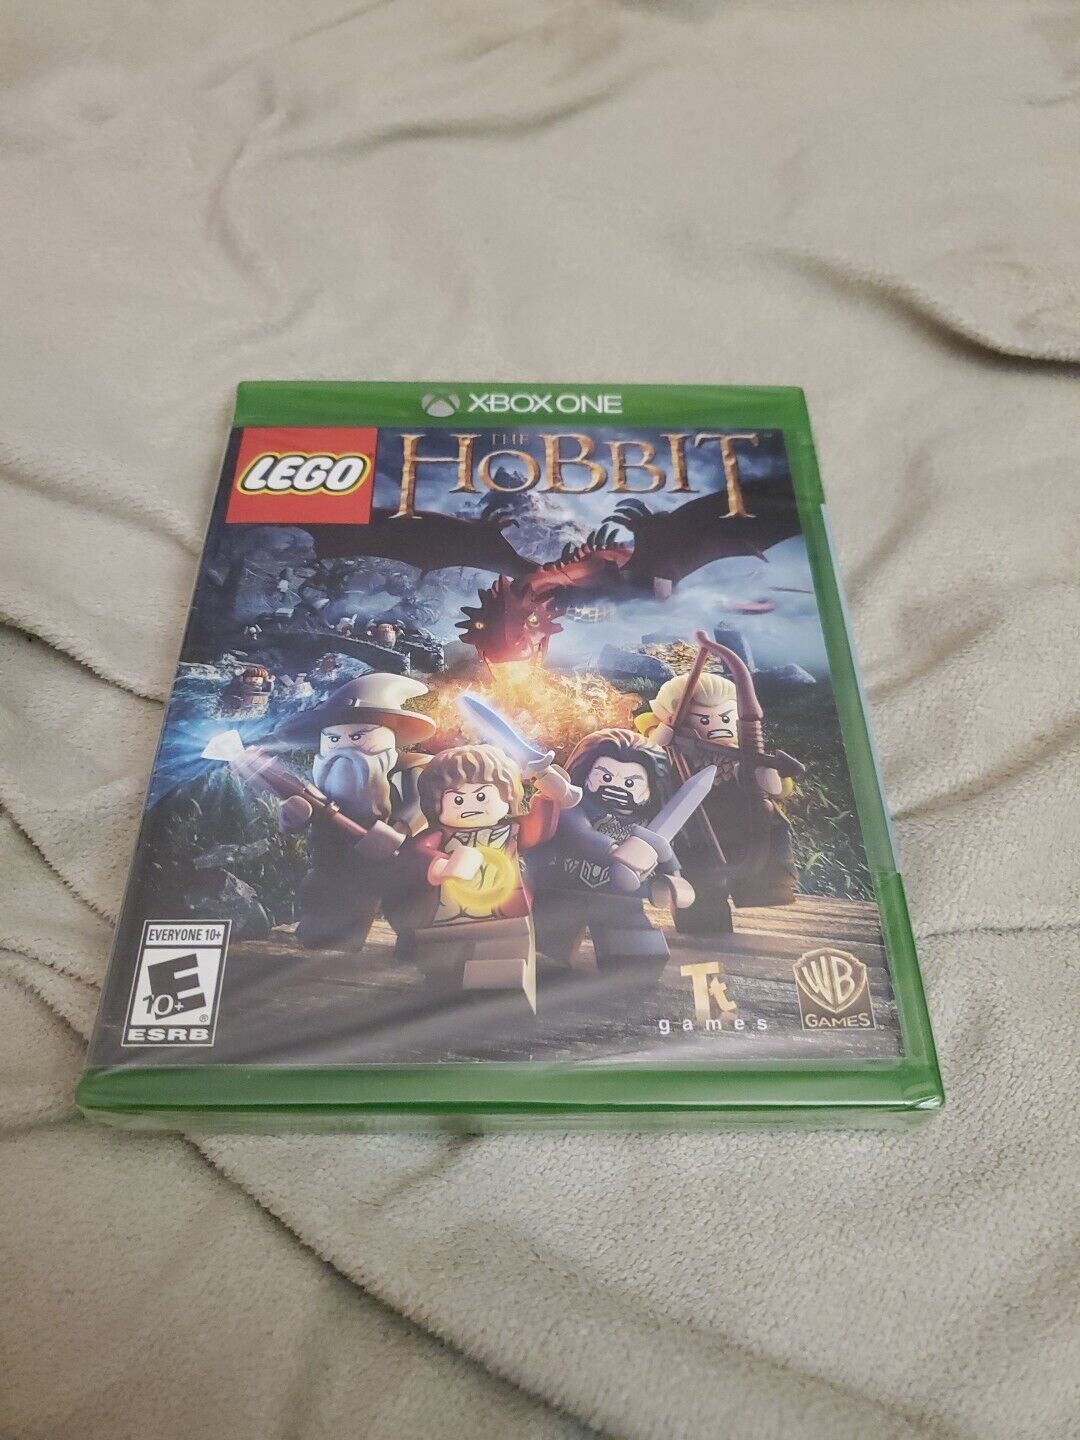 Lego The Hobbit - Xbox One - US Release - Brand New & Sealed! 